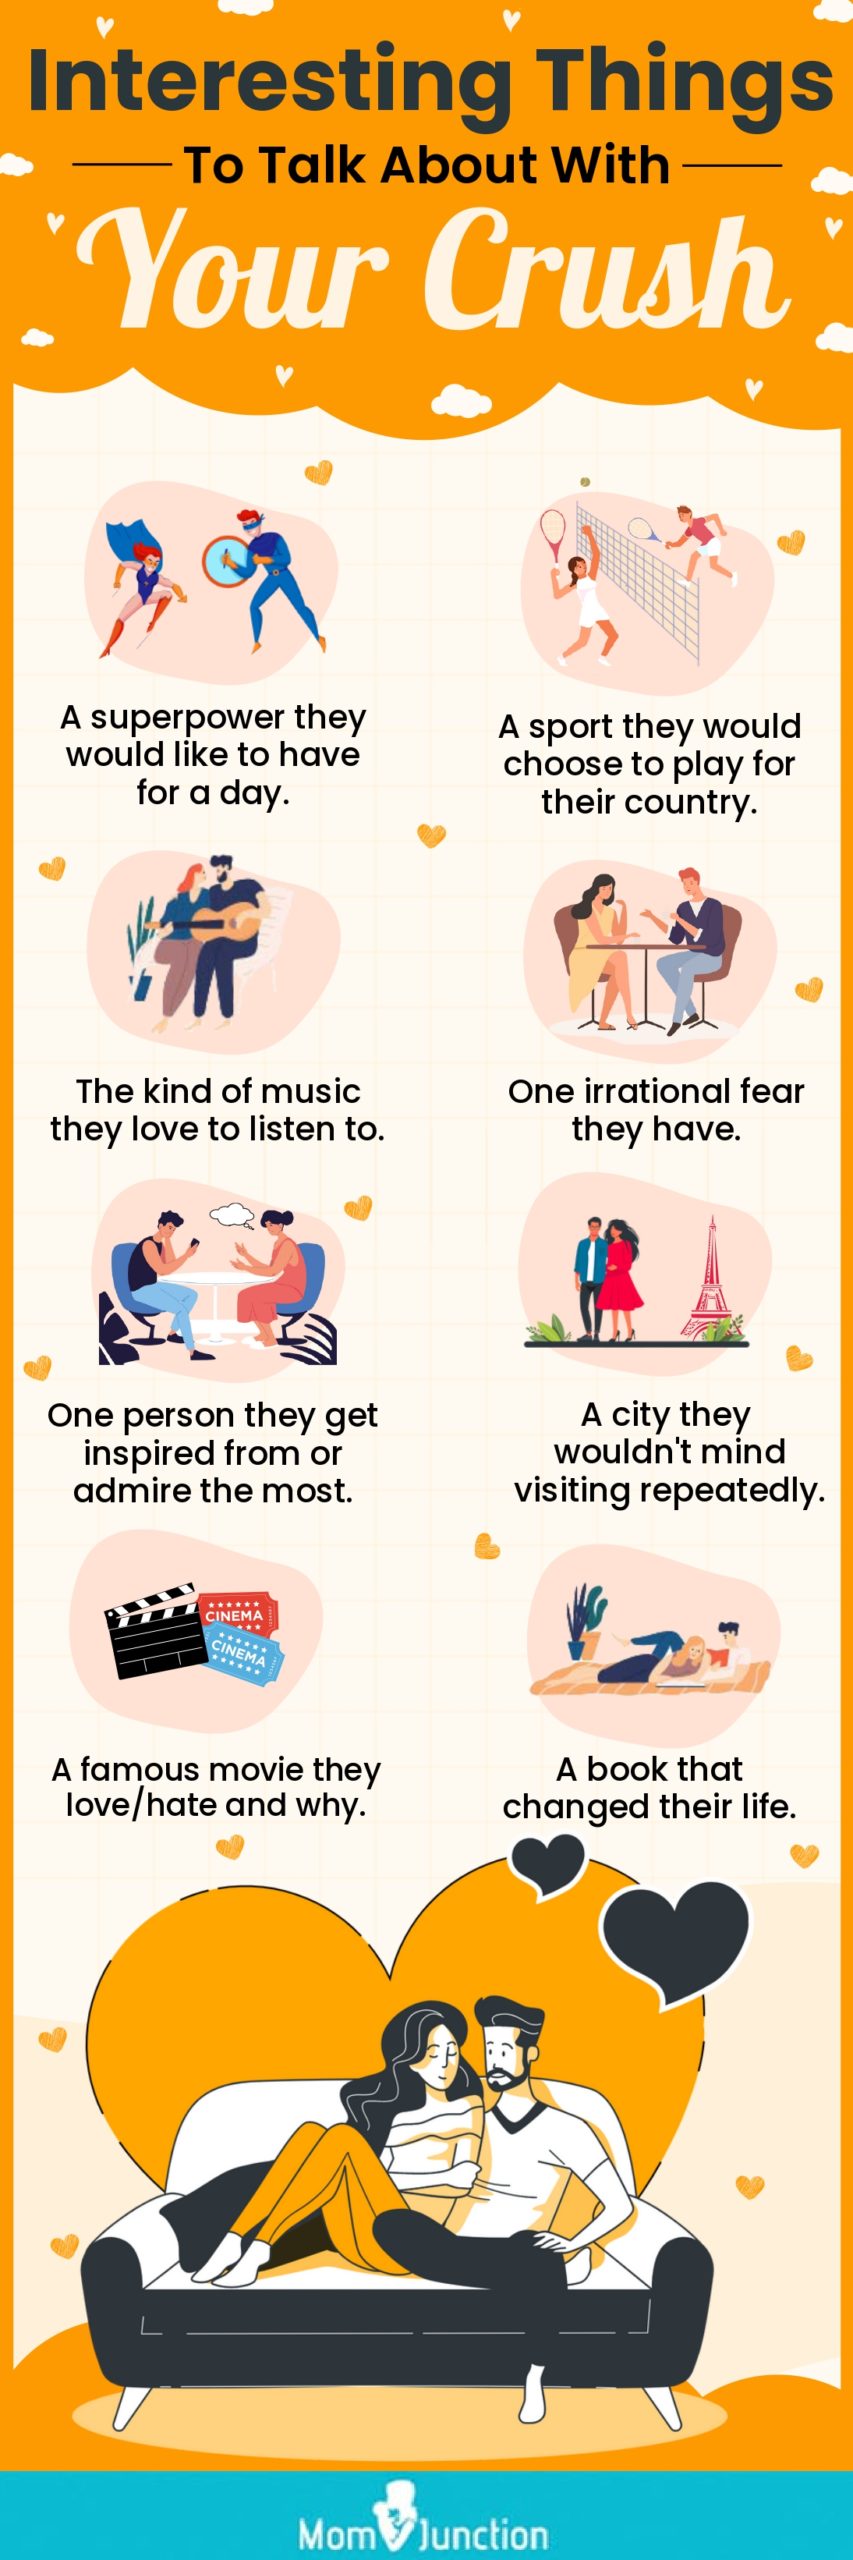 75 Interesting Things To Talk About With Your Crush